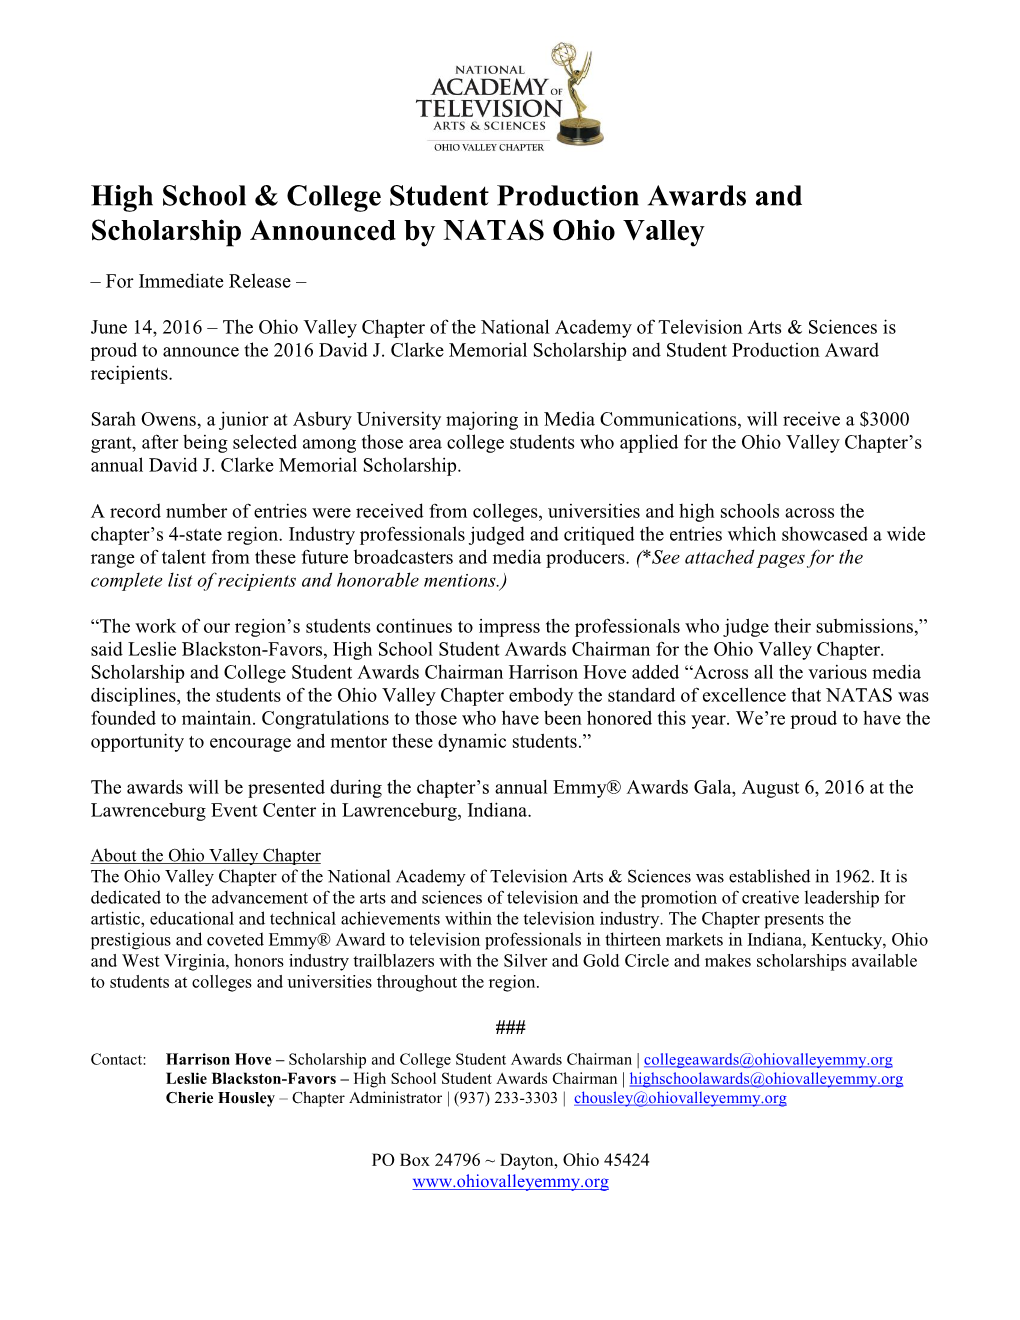 High School and College Student Production Awards